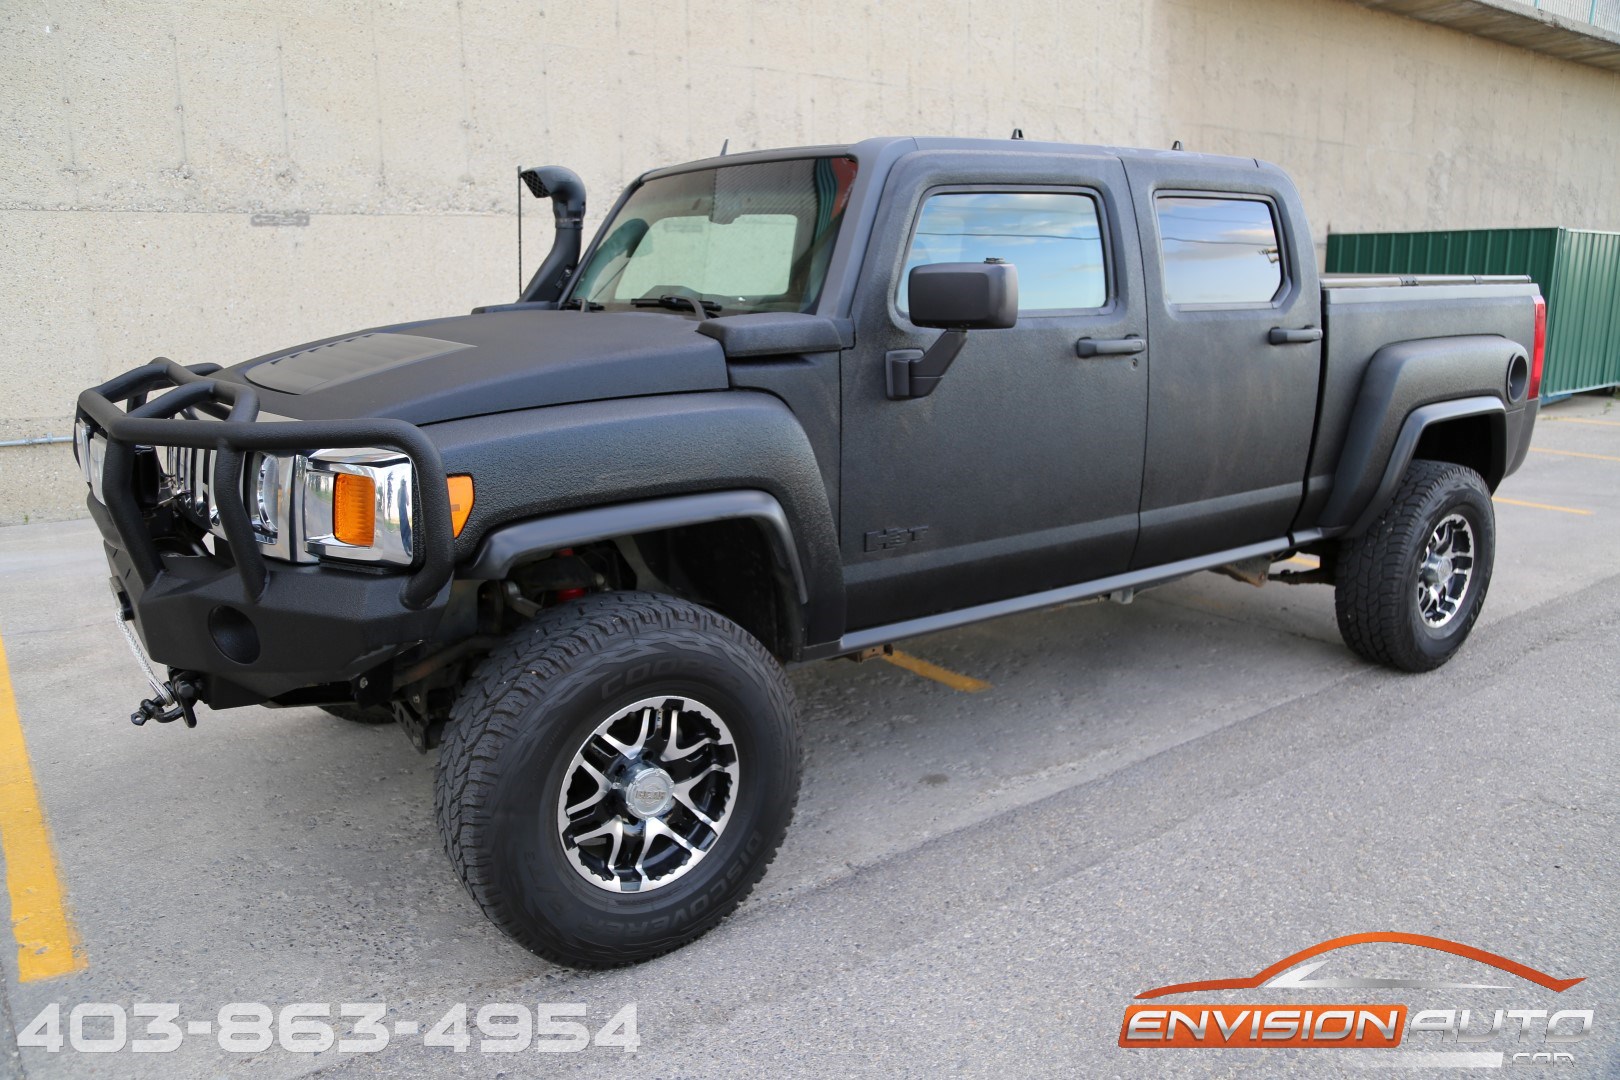 2009 Hummer H3T Truck – Offroad Package – Lifted – 5 Speed Manual | Envision ...1620 x 1080